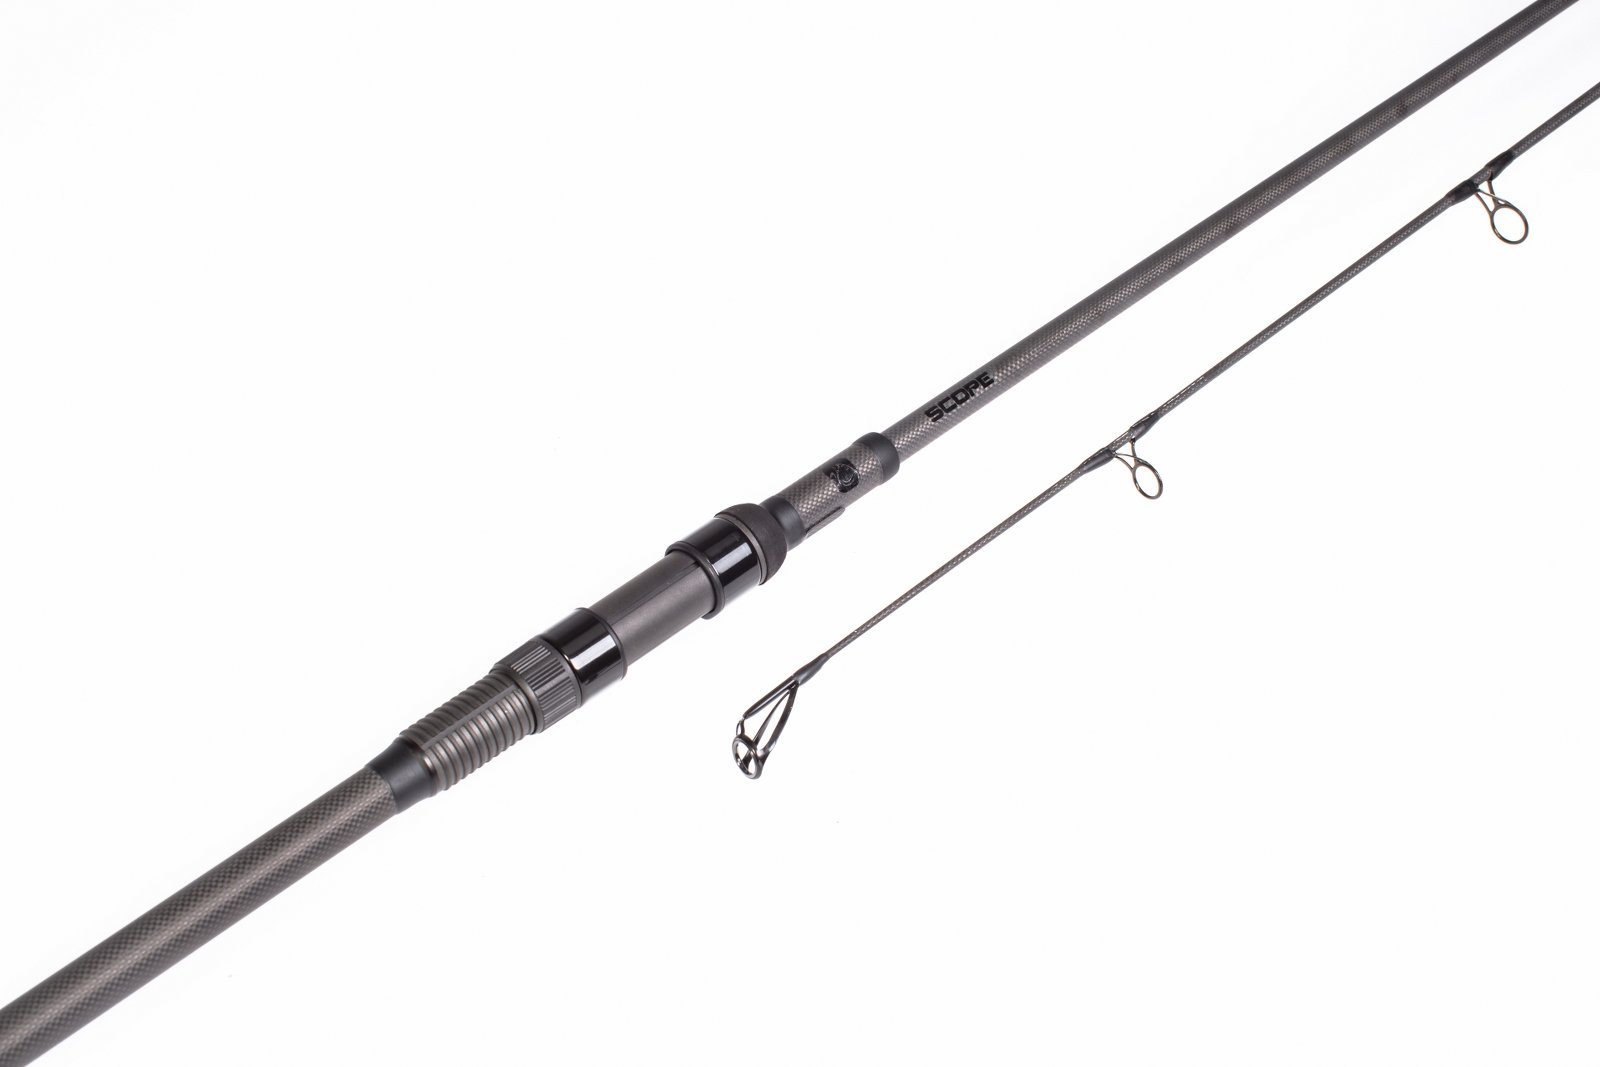 Nash Scope Abbreviated 9ft 3.25lb Scope Rods Tackle T1530 International Shop Europe